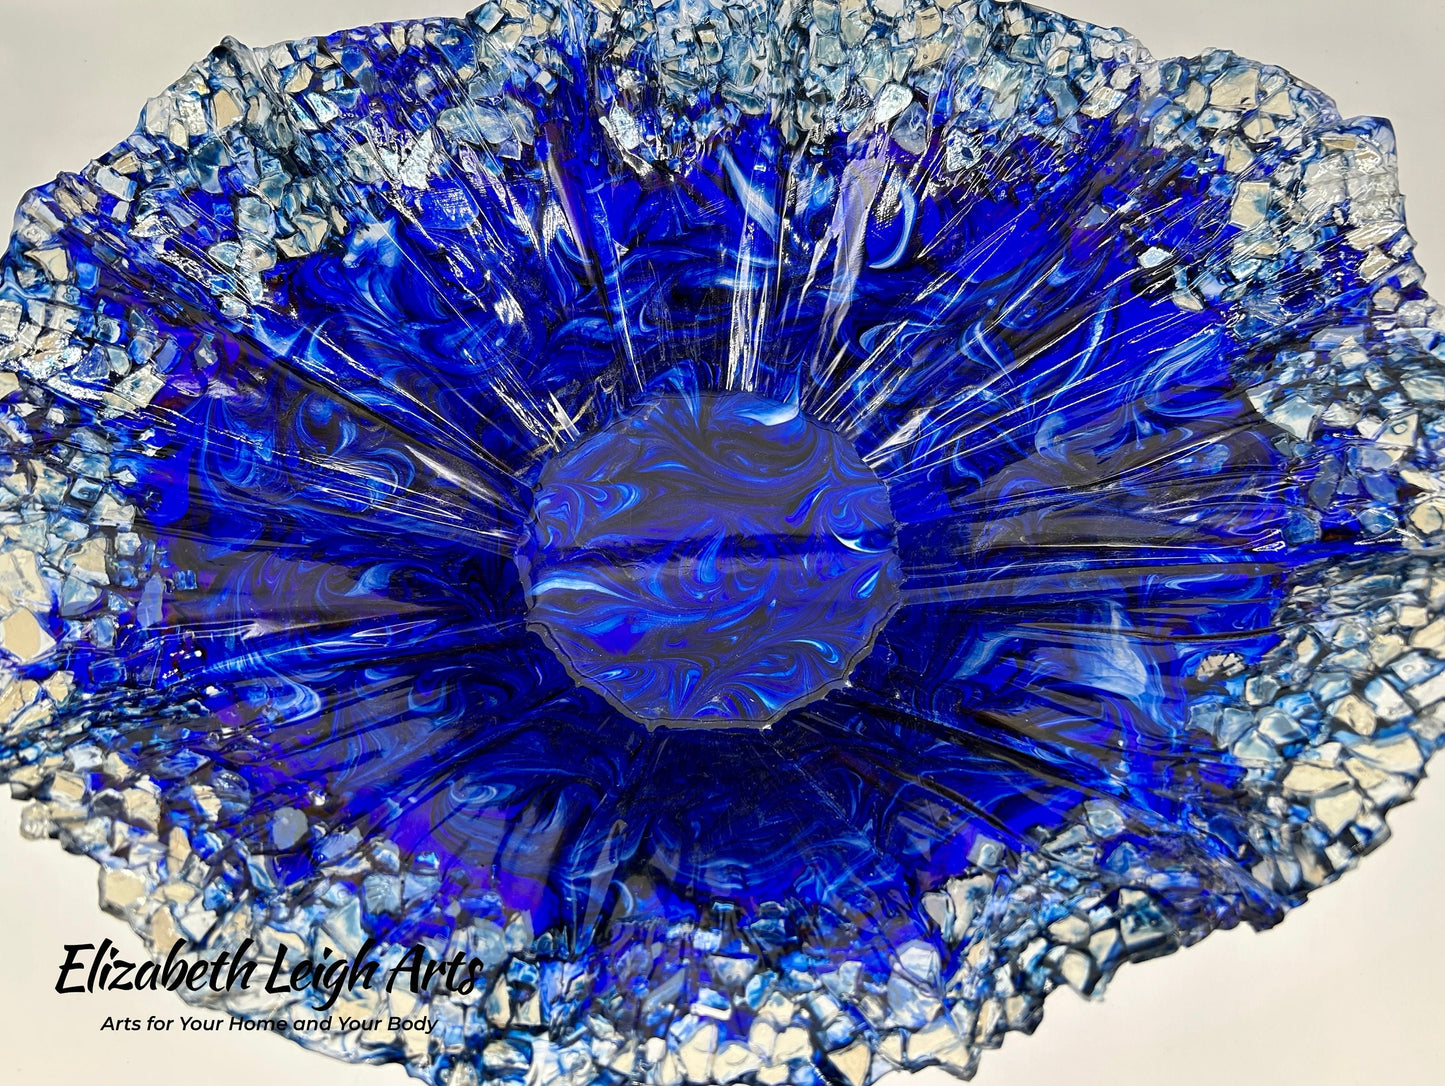 Dark Blue and Gold Resin and Glass Decorative Bowl Free Form MADE TO ORDER